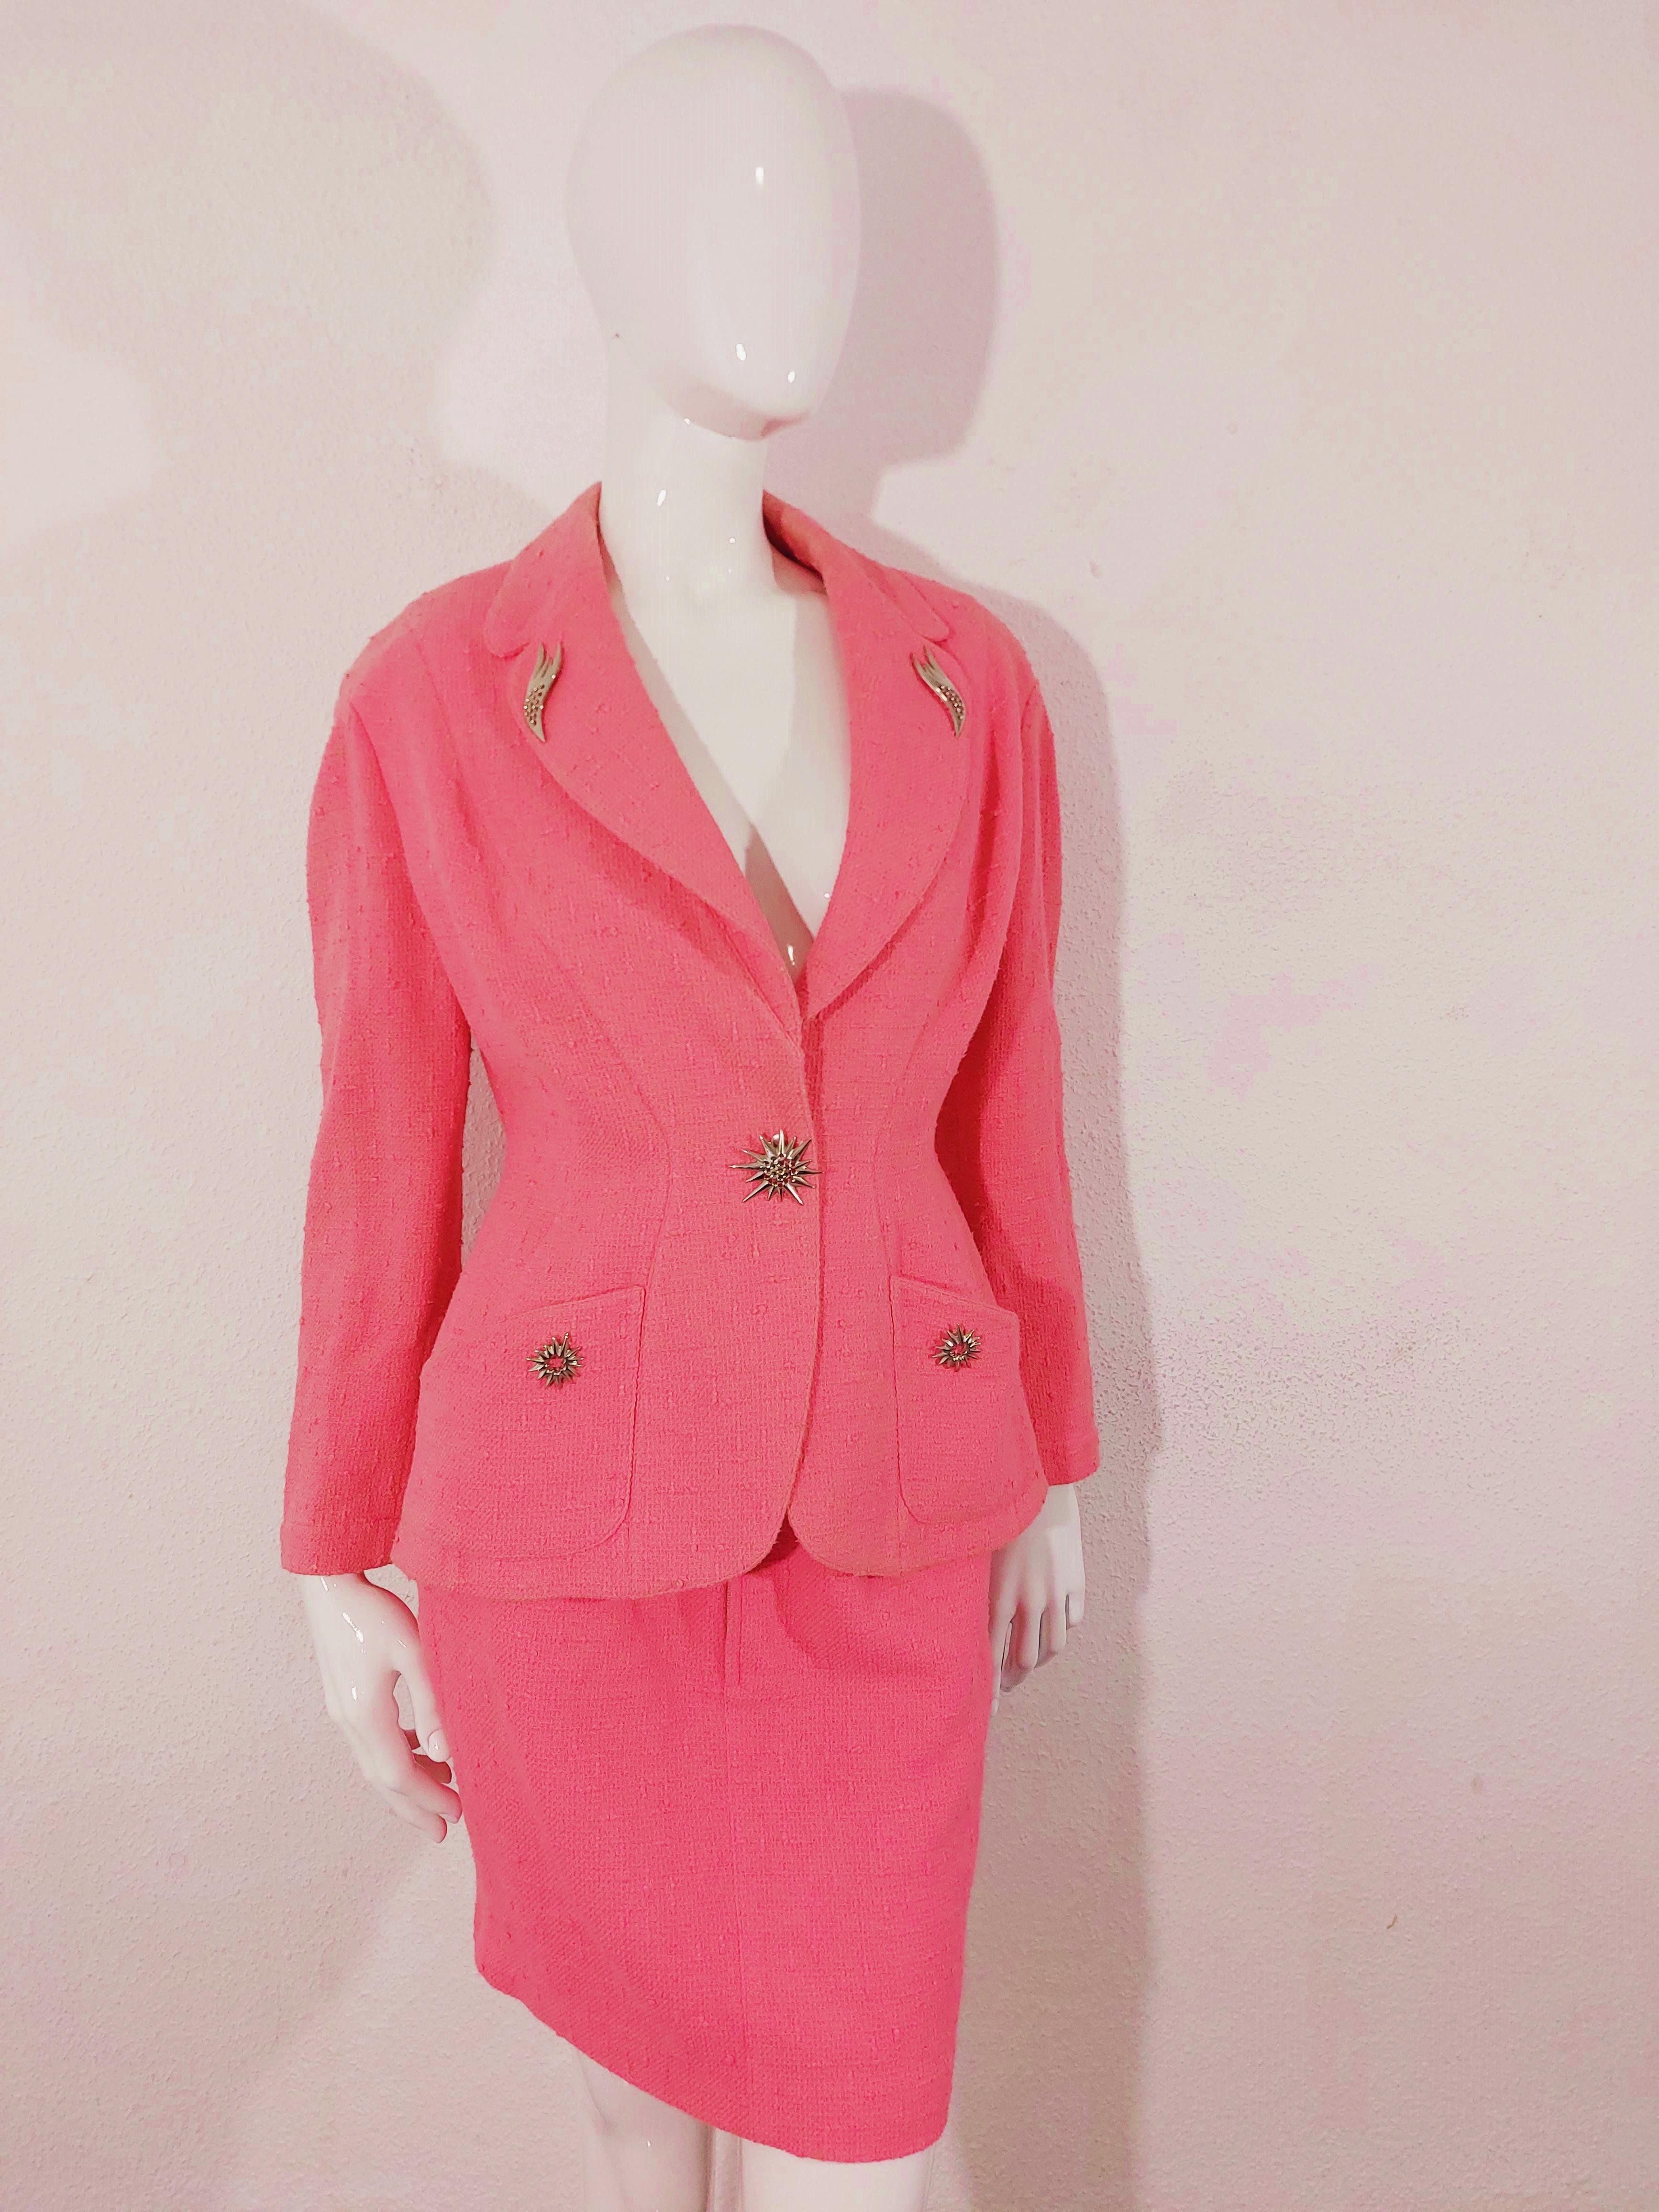 Thierry Mugler Couture Brooch FW 1990 Pin Pink Badge Blazer Skirt Suit Set In Good Condition For Sale In PARIS, FR